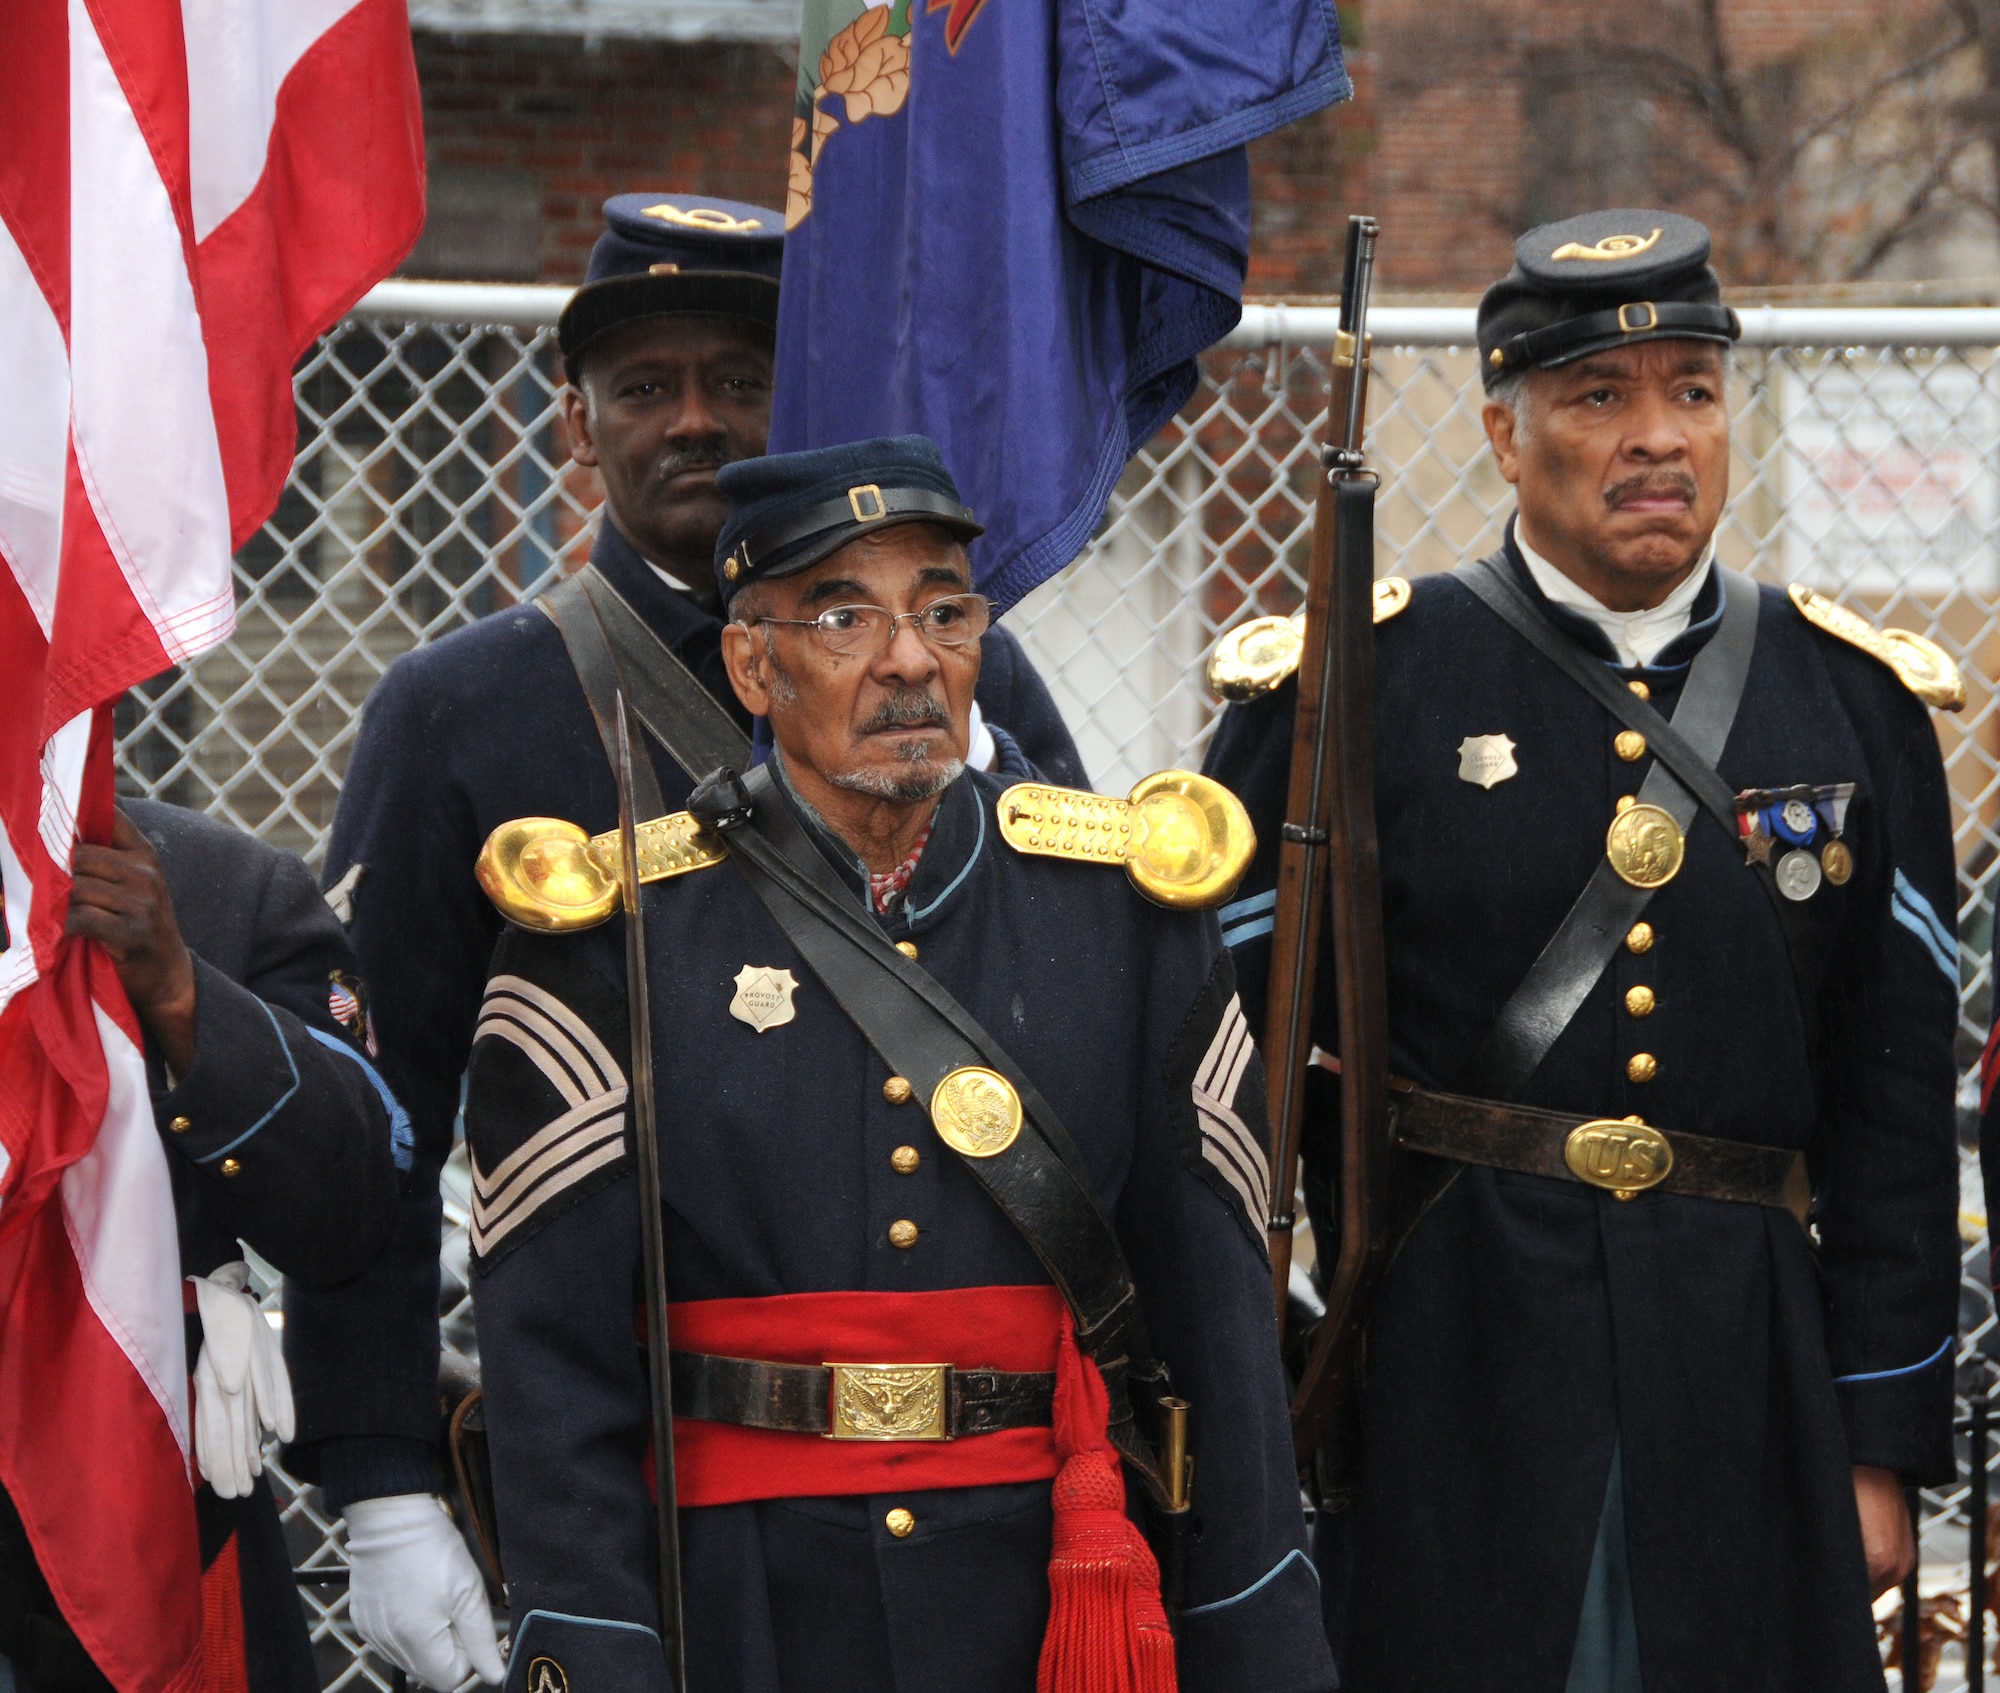 Members of the 3rd Regiment U.S. Colored troops stand guard during the wreath laying ceremony honoring fallen Army Guardsman, Maj. Octavius V. Catto on Feb. 23. Catto was assassinated in 1871 near his home, in what is now considered Old City Philadelphia. Soldiers of the 3rd Regiment can be regularly seen through the region wearing period-correct uniforms at parades, events and commemorations.